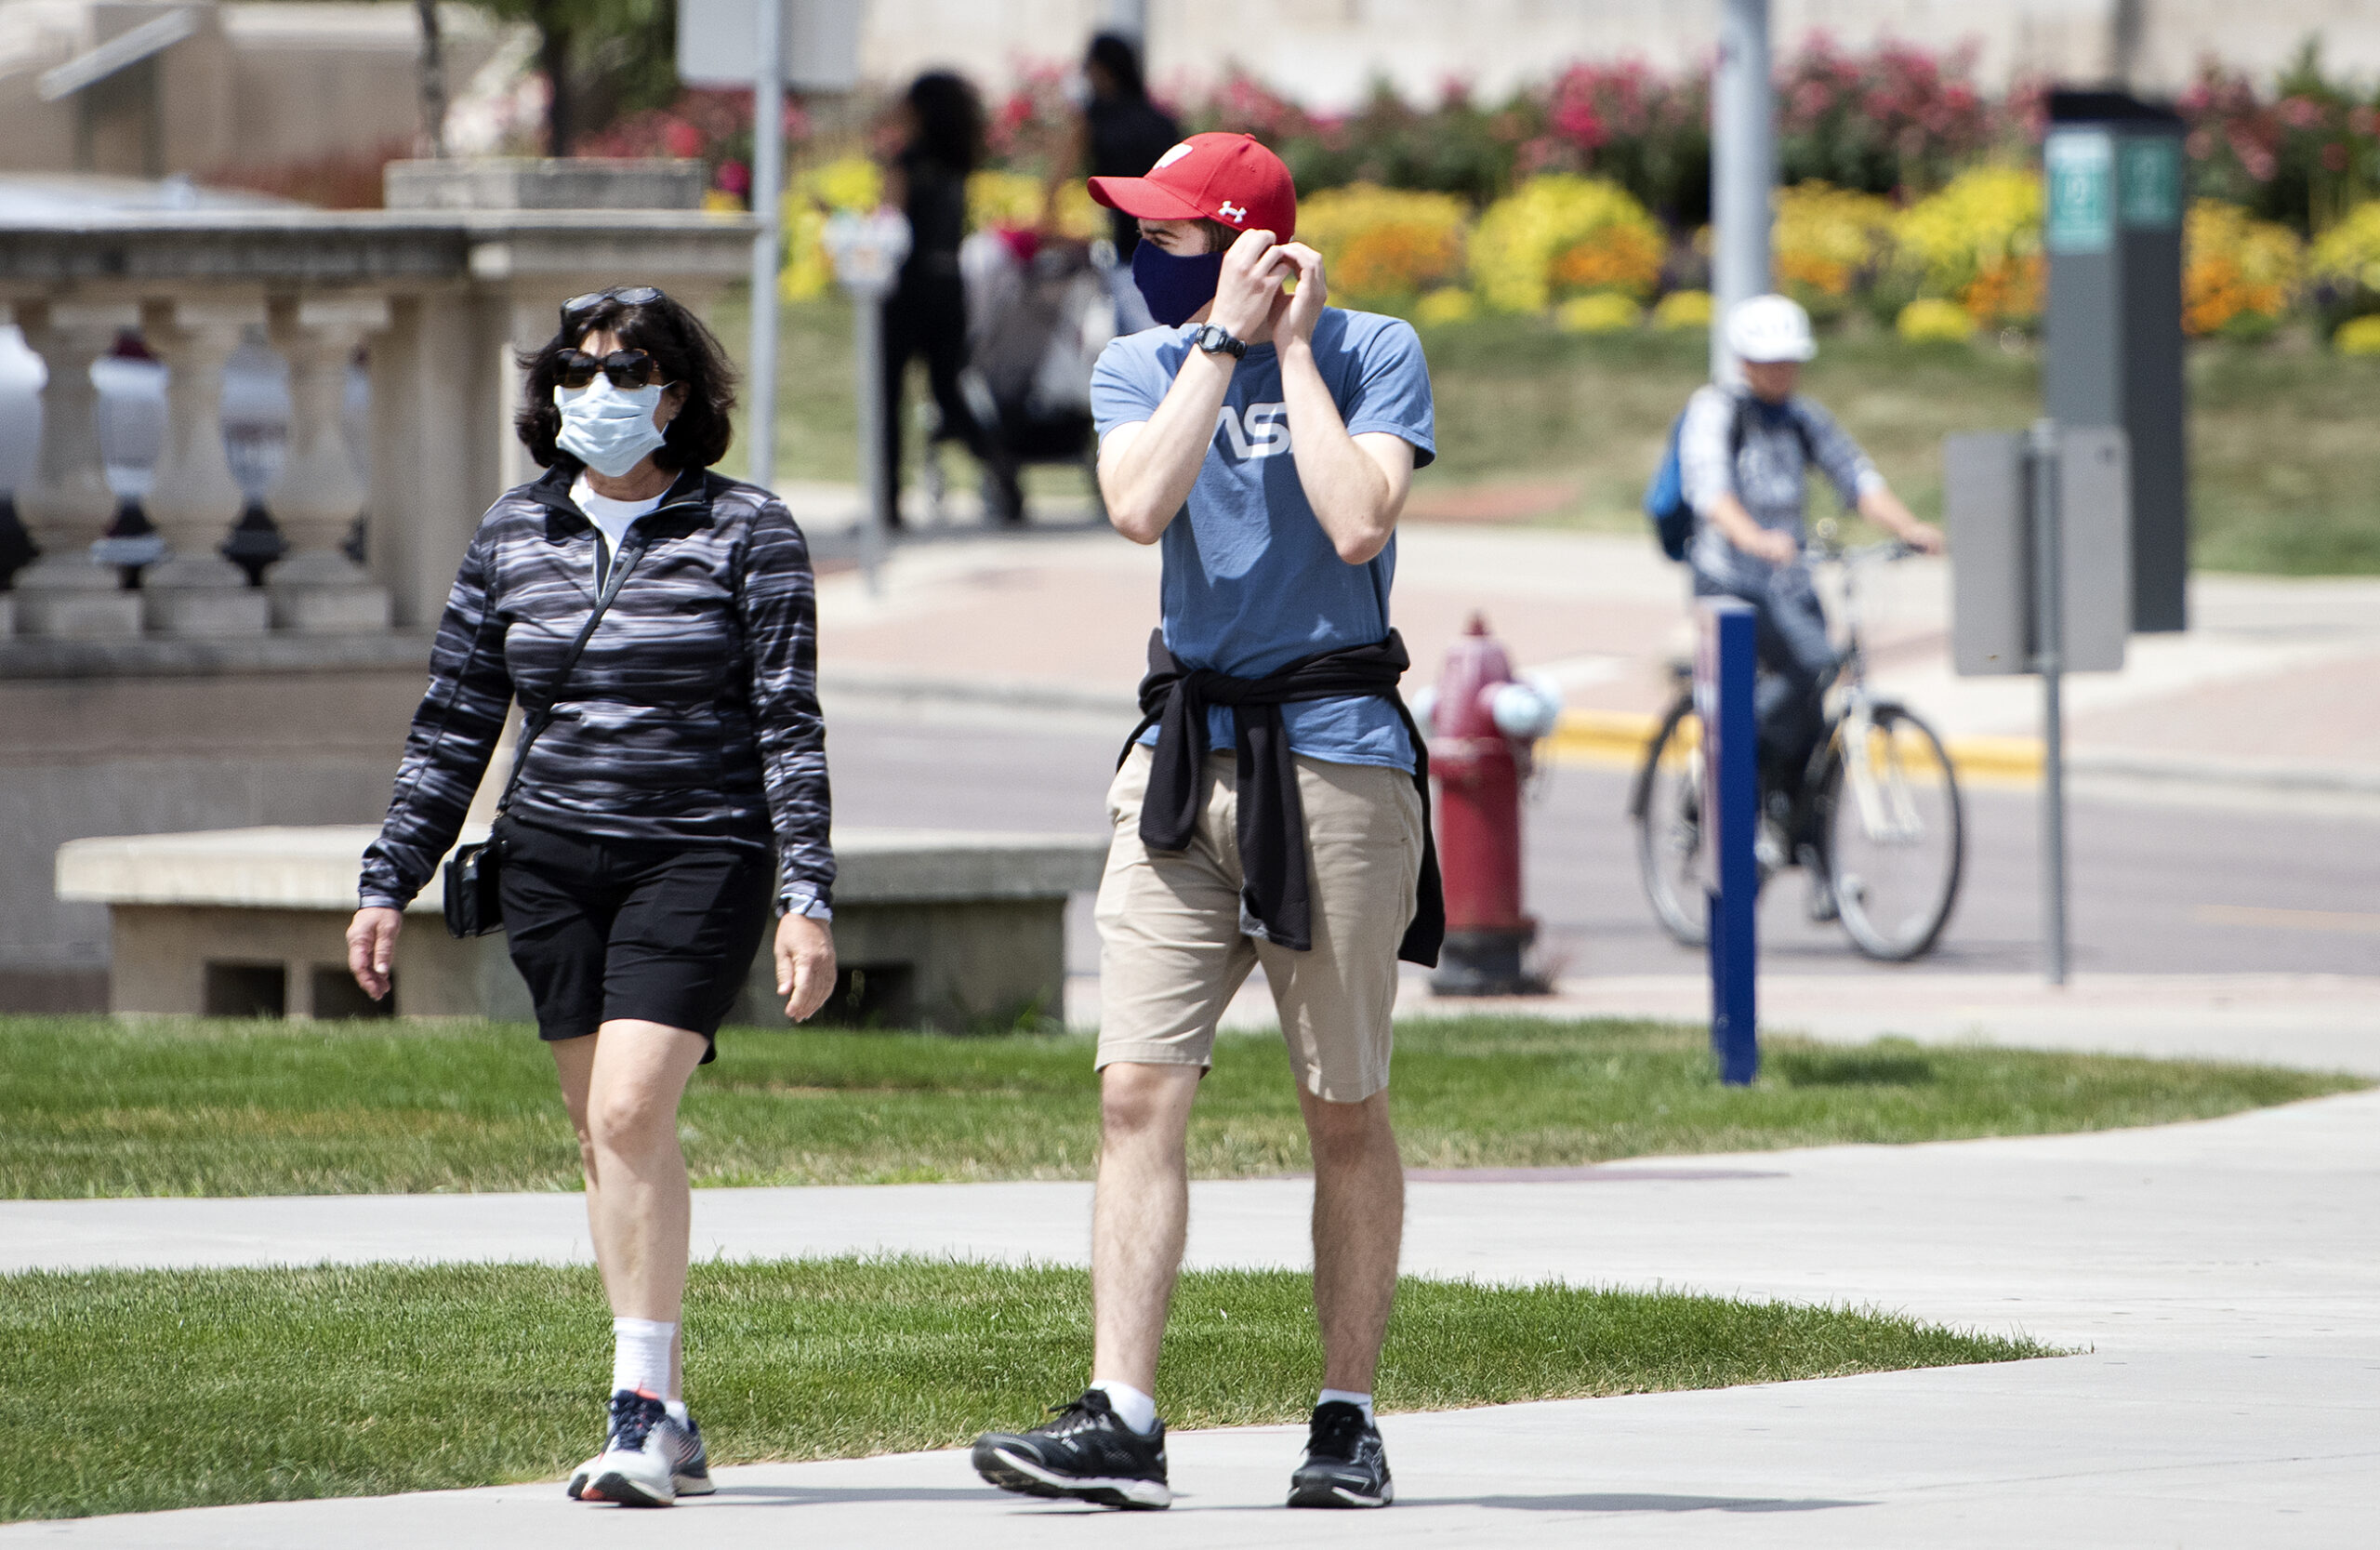 People wearing mask because of the pandemic